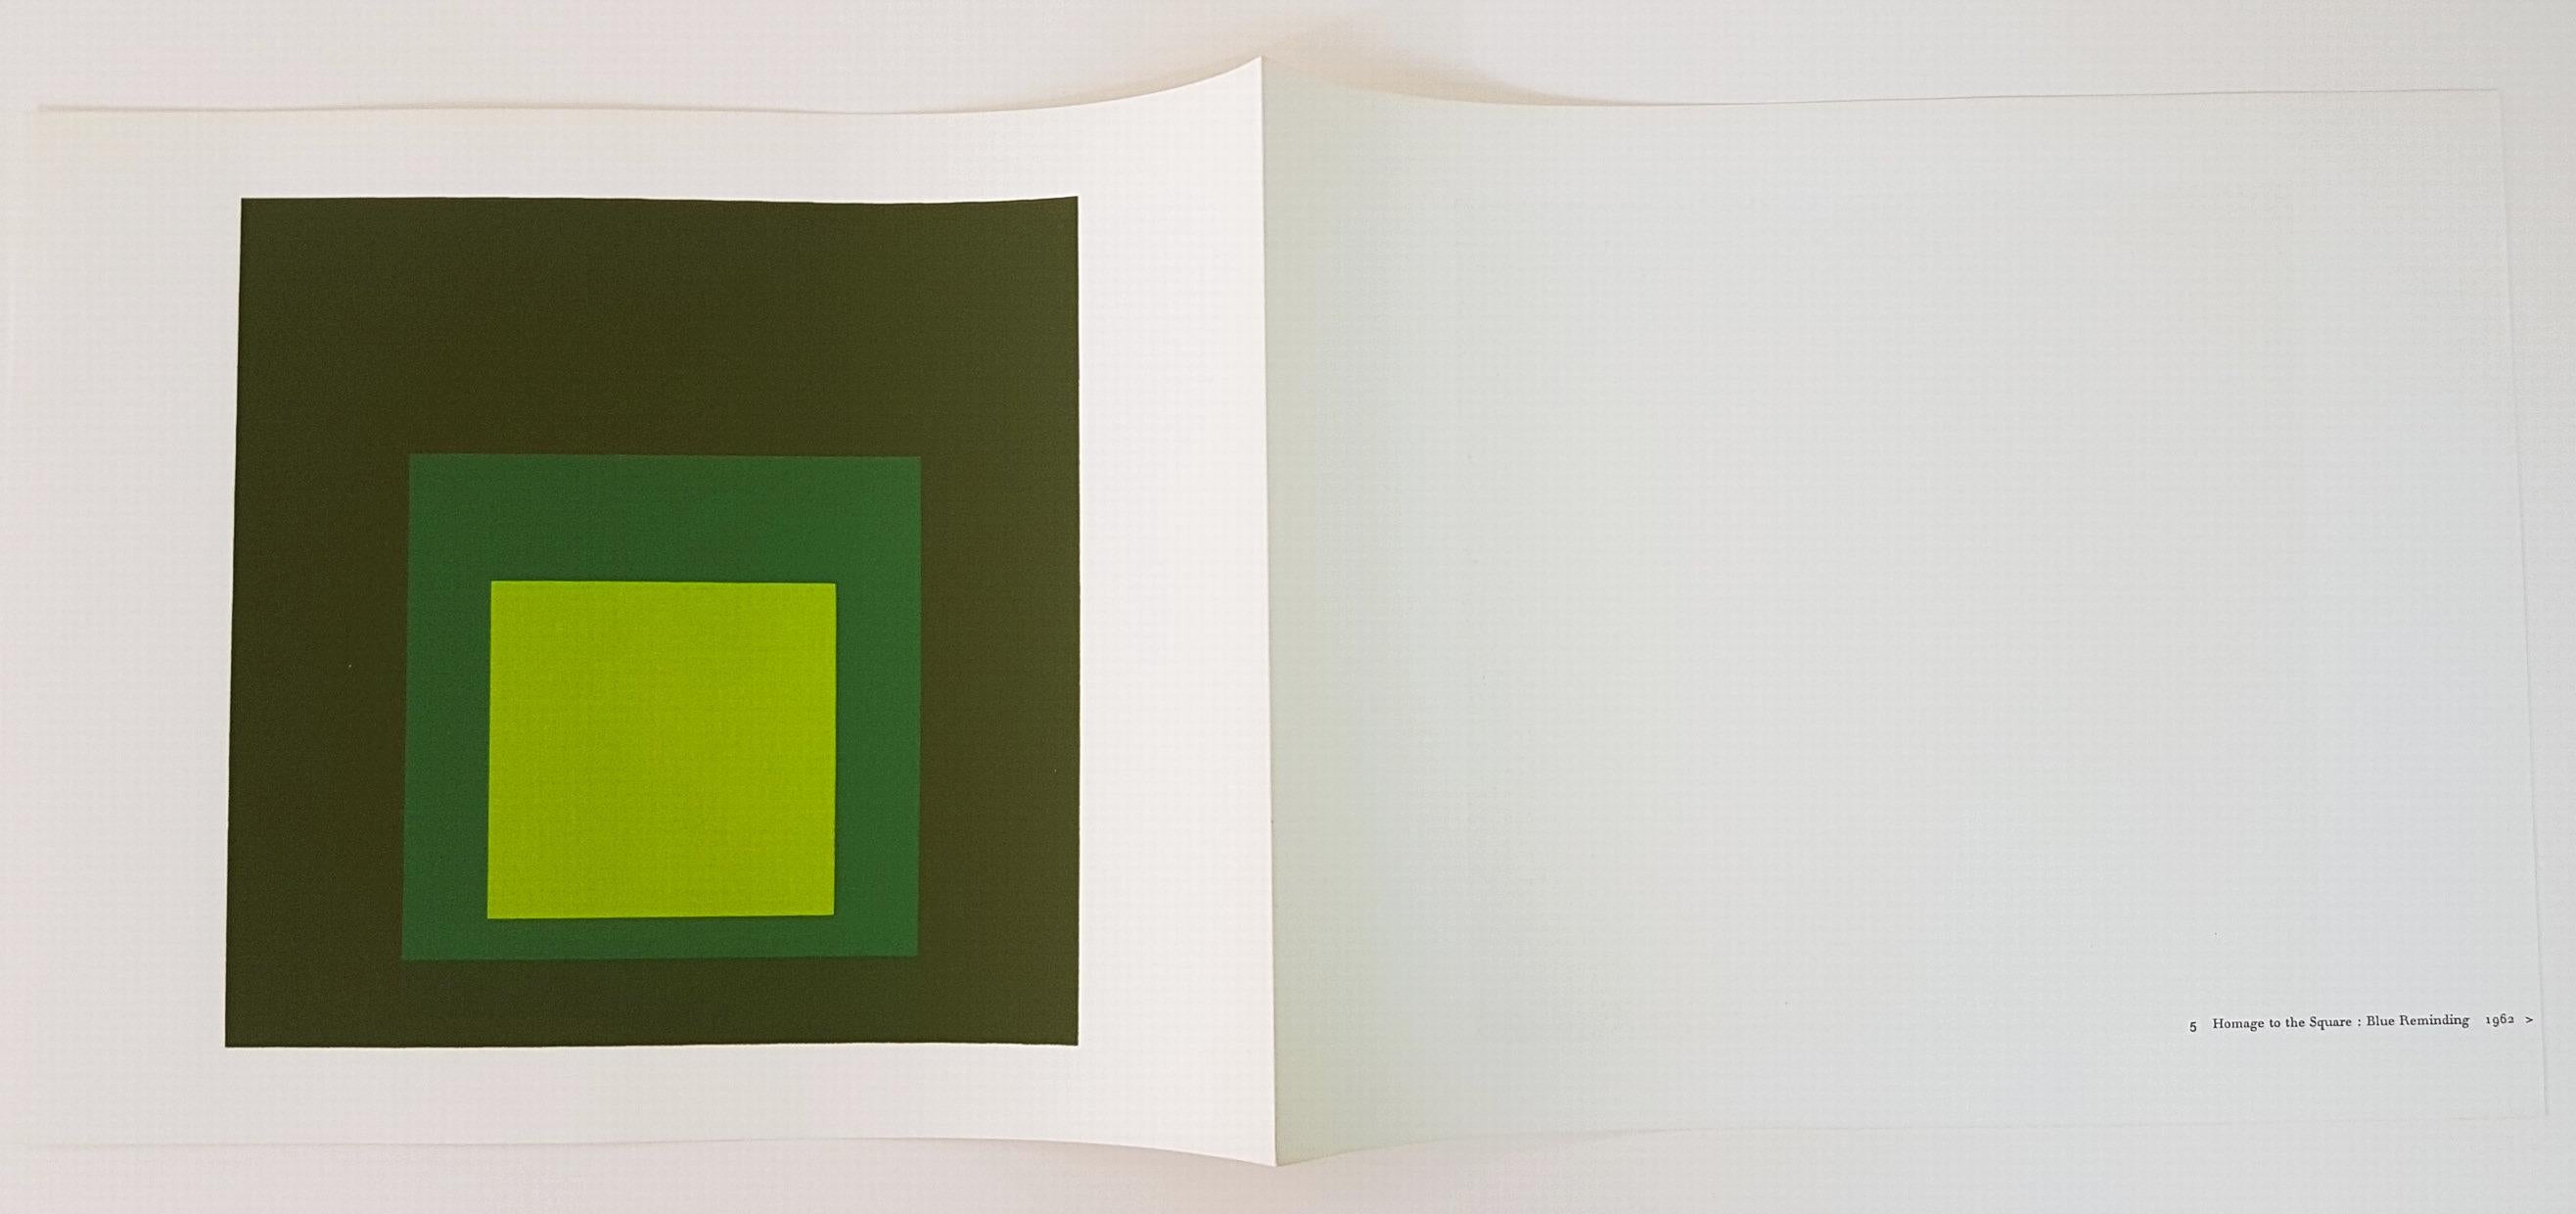 Homage to the Square: Tuscany - Modern Print by (after) Josef Albers